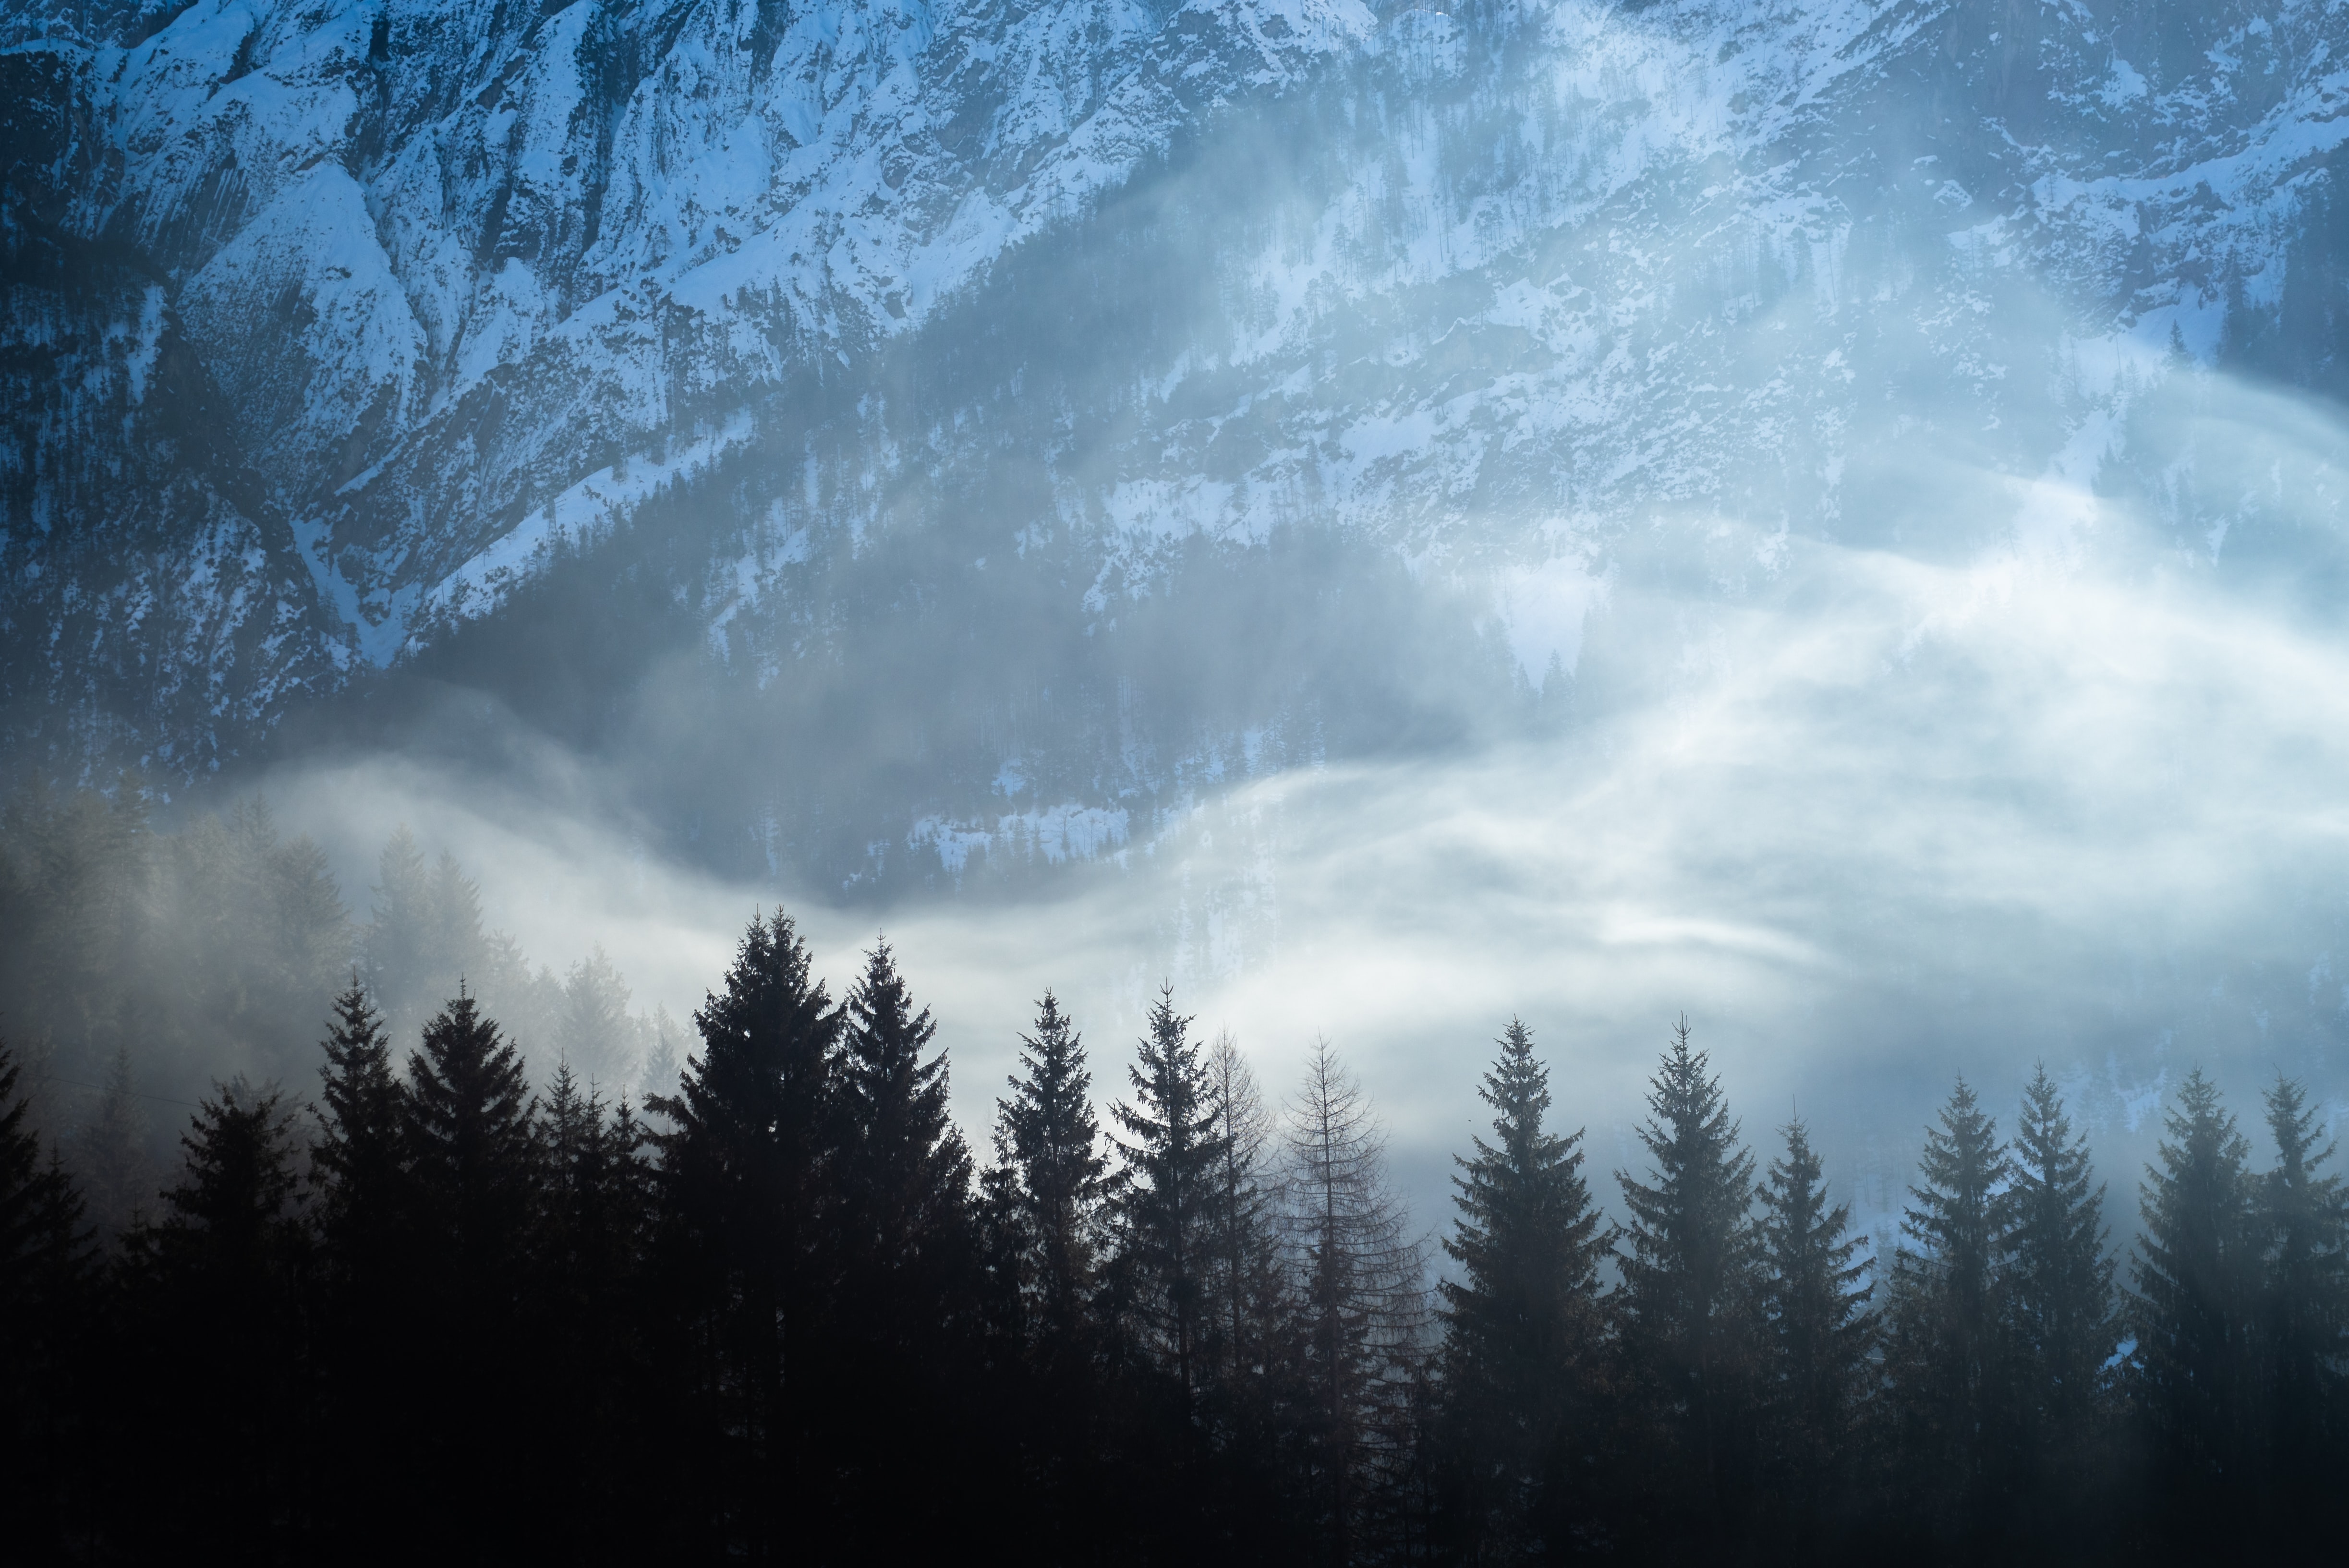 android mountains, landscape, nature, snow, fir trees, fog